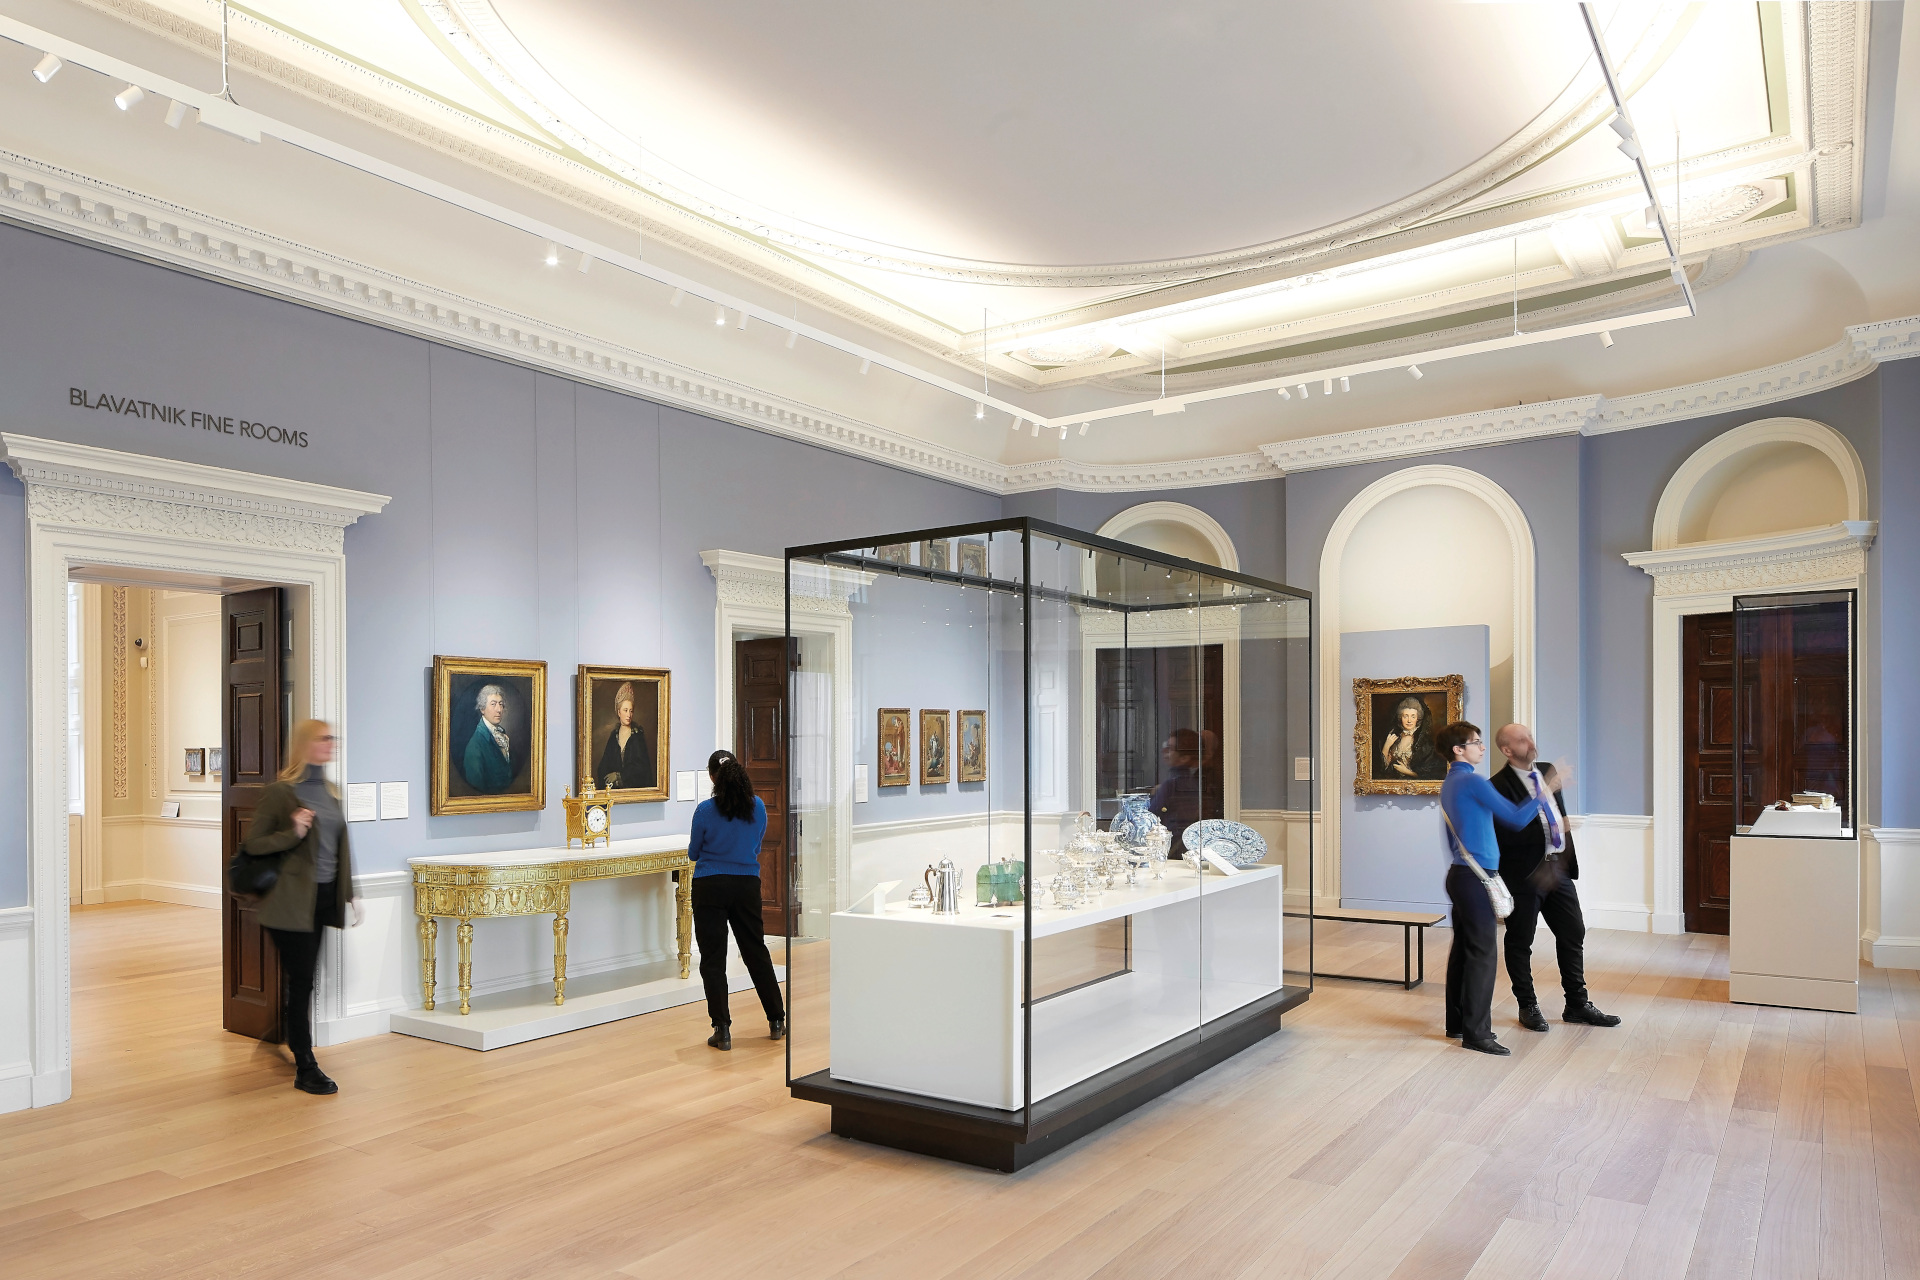 The Blavatnik Fine Rooms at The Courtauld Gallery